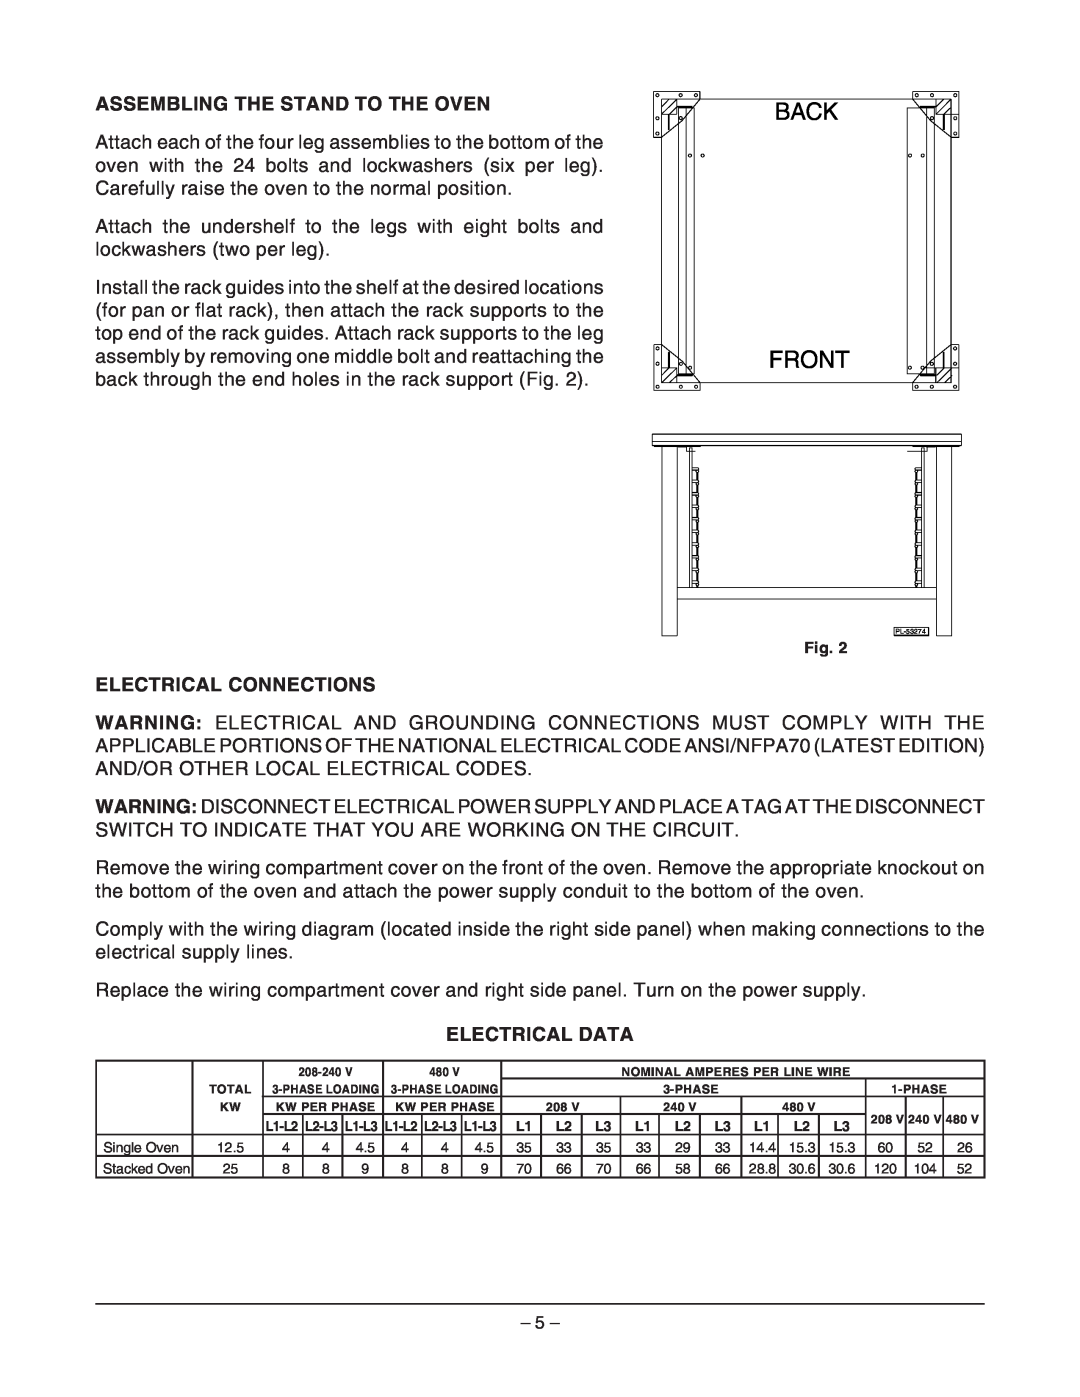 Hobart HEC5D ML-126751 manual Assembling The Stand To The Oven, Electrical Connections, Electrical Data, Back Front 